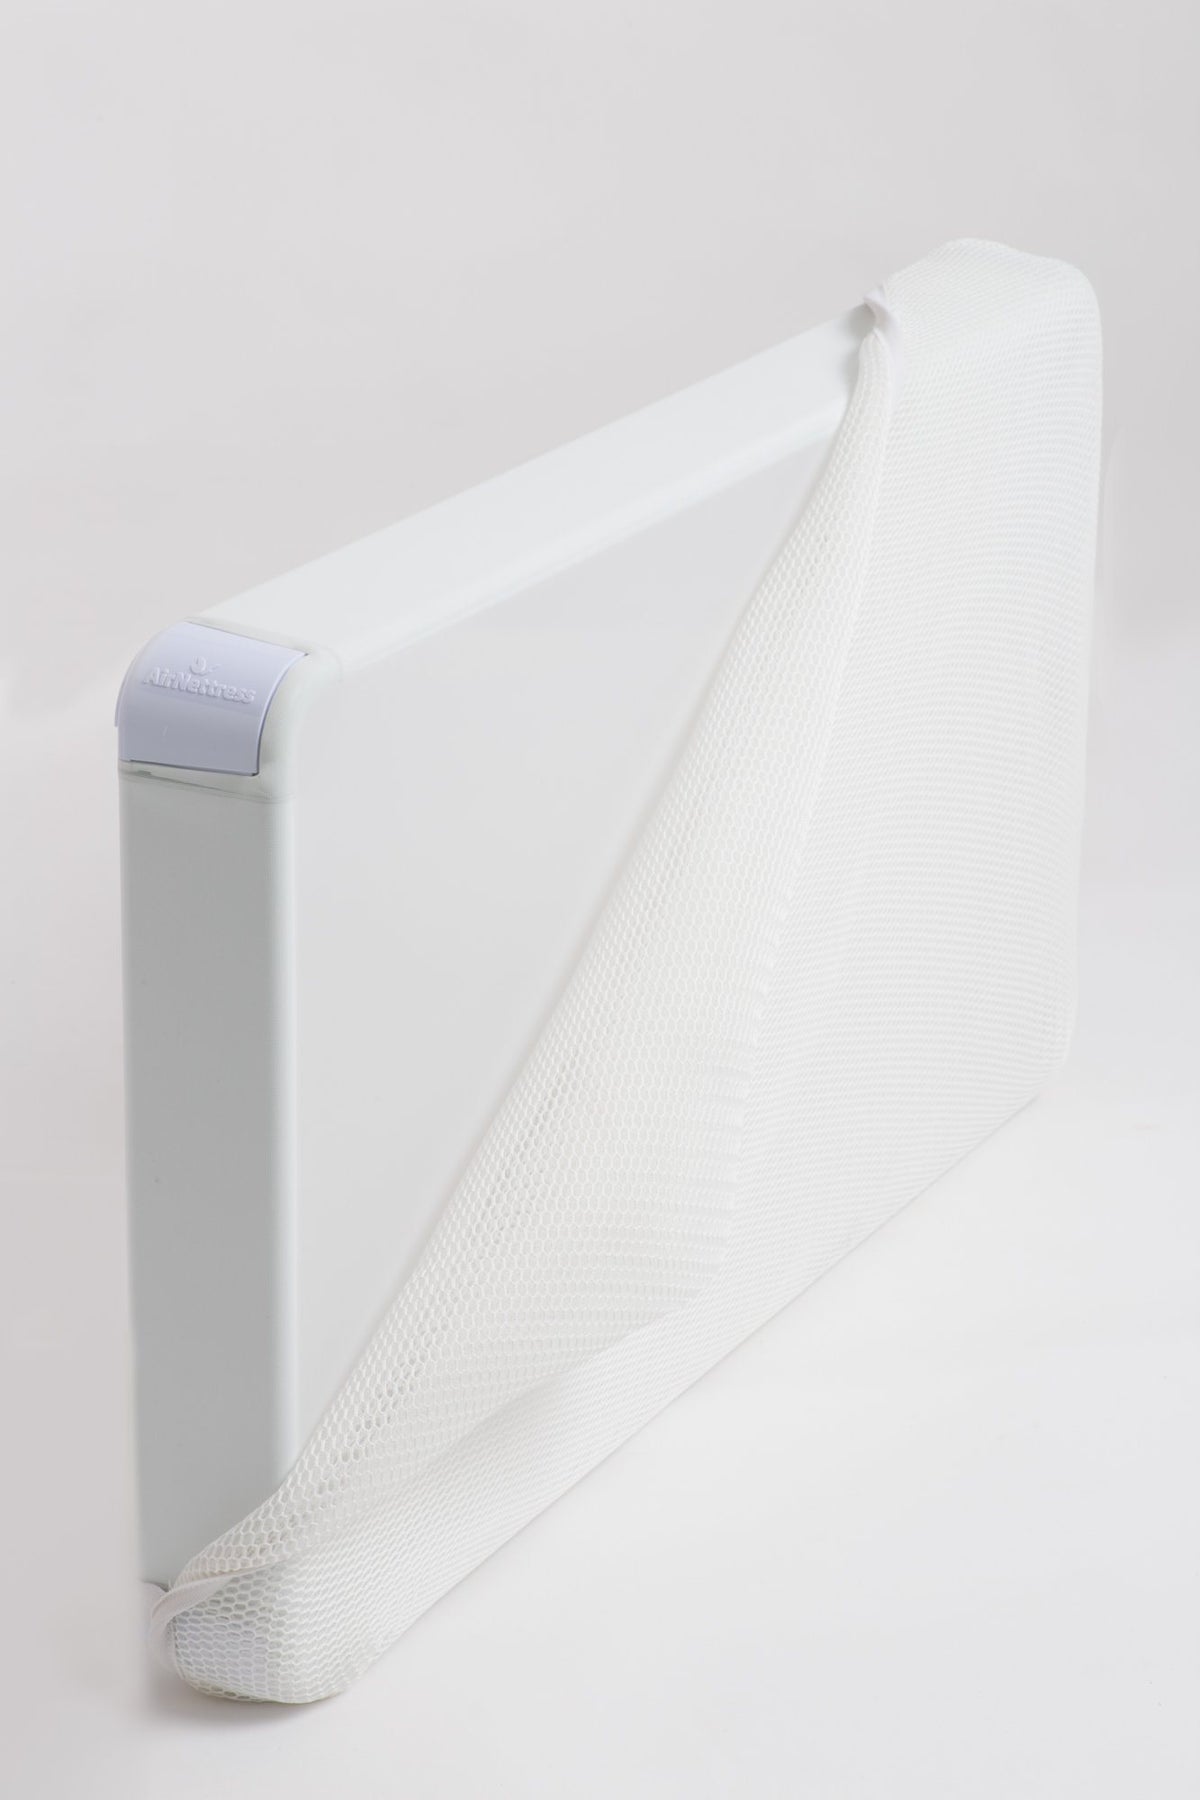 Additional Comfort Layer (Bassinet Size)